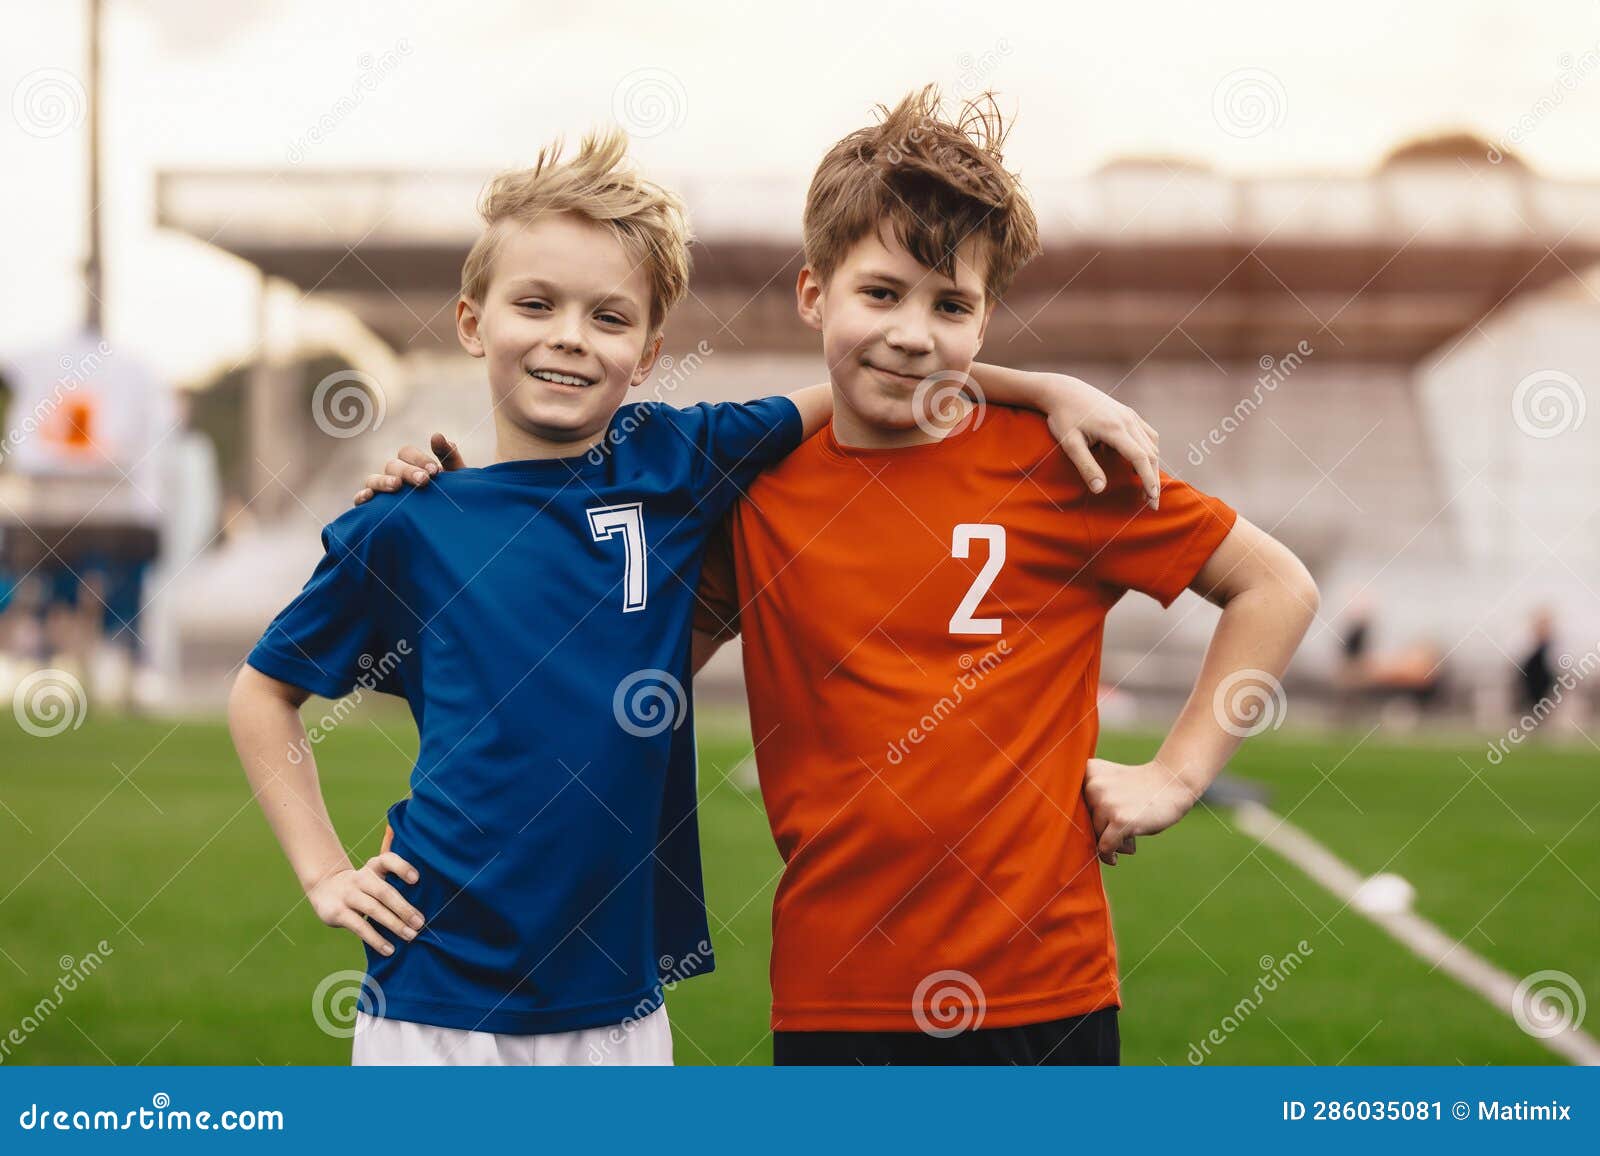 children's friendship in sports competition. kids soccer players in school sports tournaments